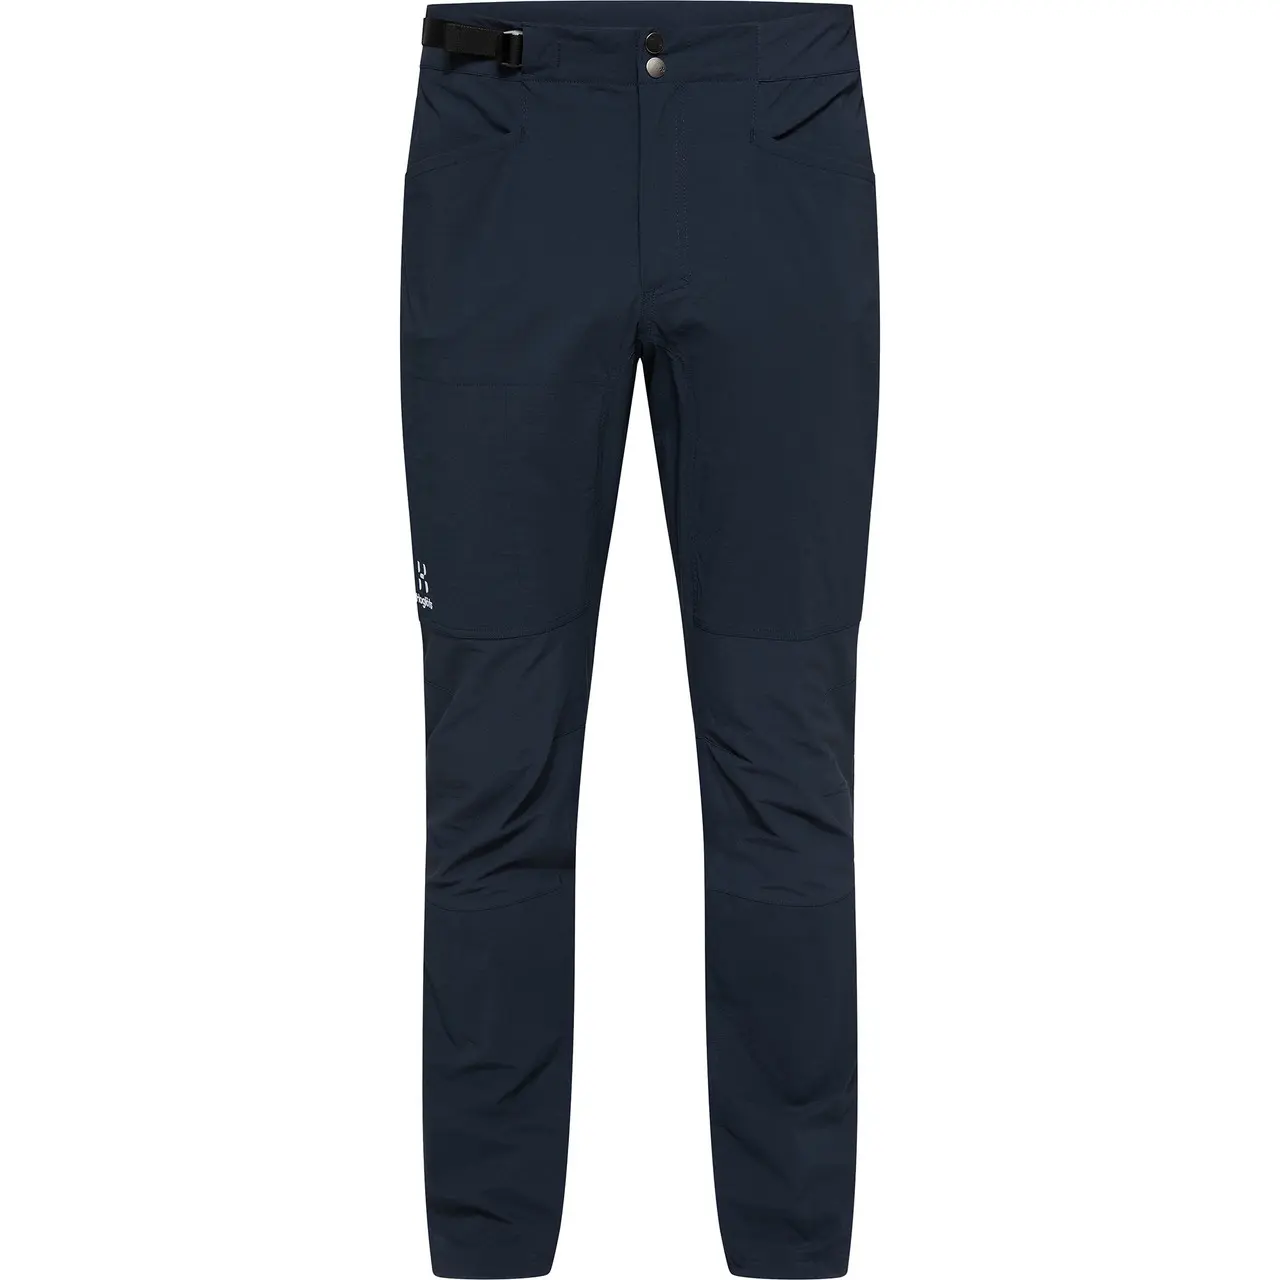 Cheap and Fine Sir | 2023 Lim Gtx Pants Haglofs Limited Edition Available